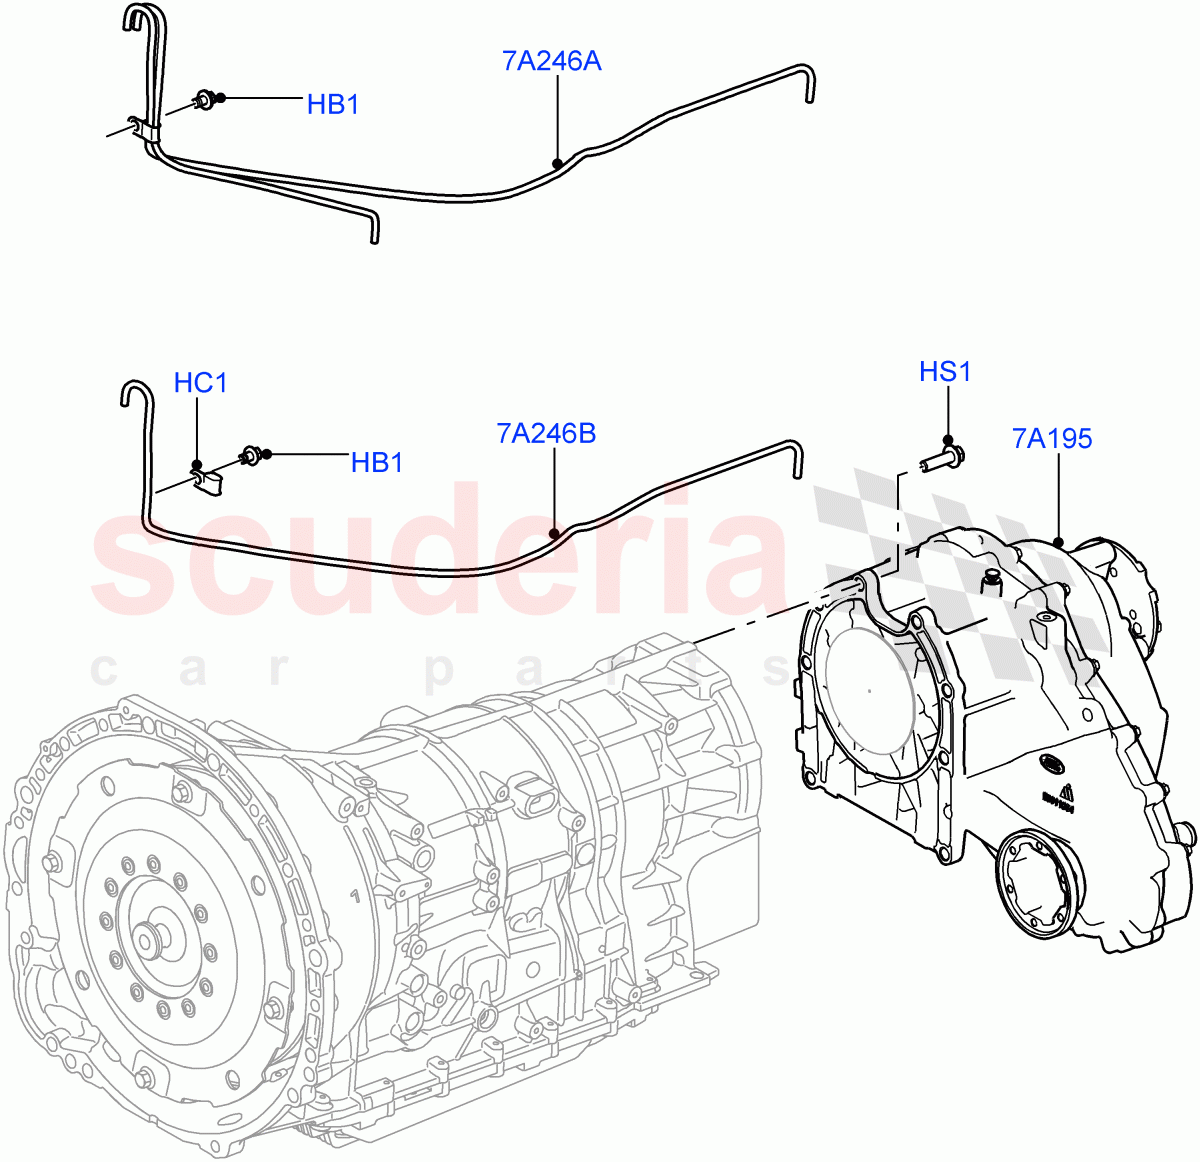 Transfer Drive Case(8 Speed Auto Trans ZF 8HP70 4WD,With 1 Speed Transfer Case,8 Speed Auto Trans ZF 8HP45)((V)FROMEA000001,(V)TOGA999999) of Land Rover Land Rover Range Rover (2012-2021) [3.0 Diesel 24V DOHC TC]